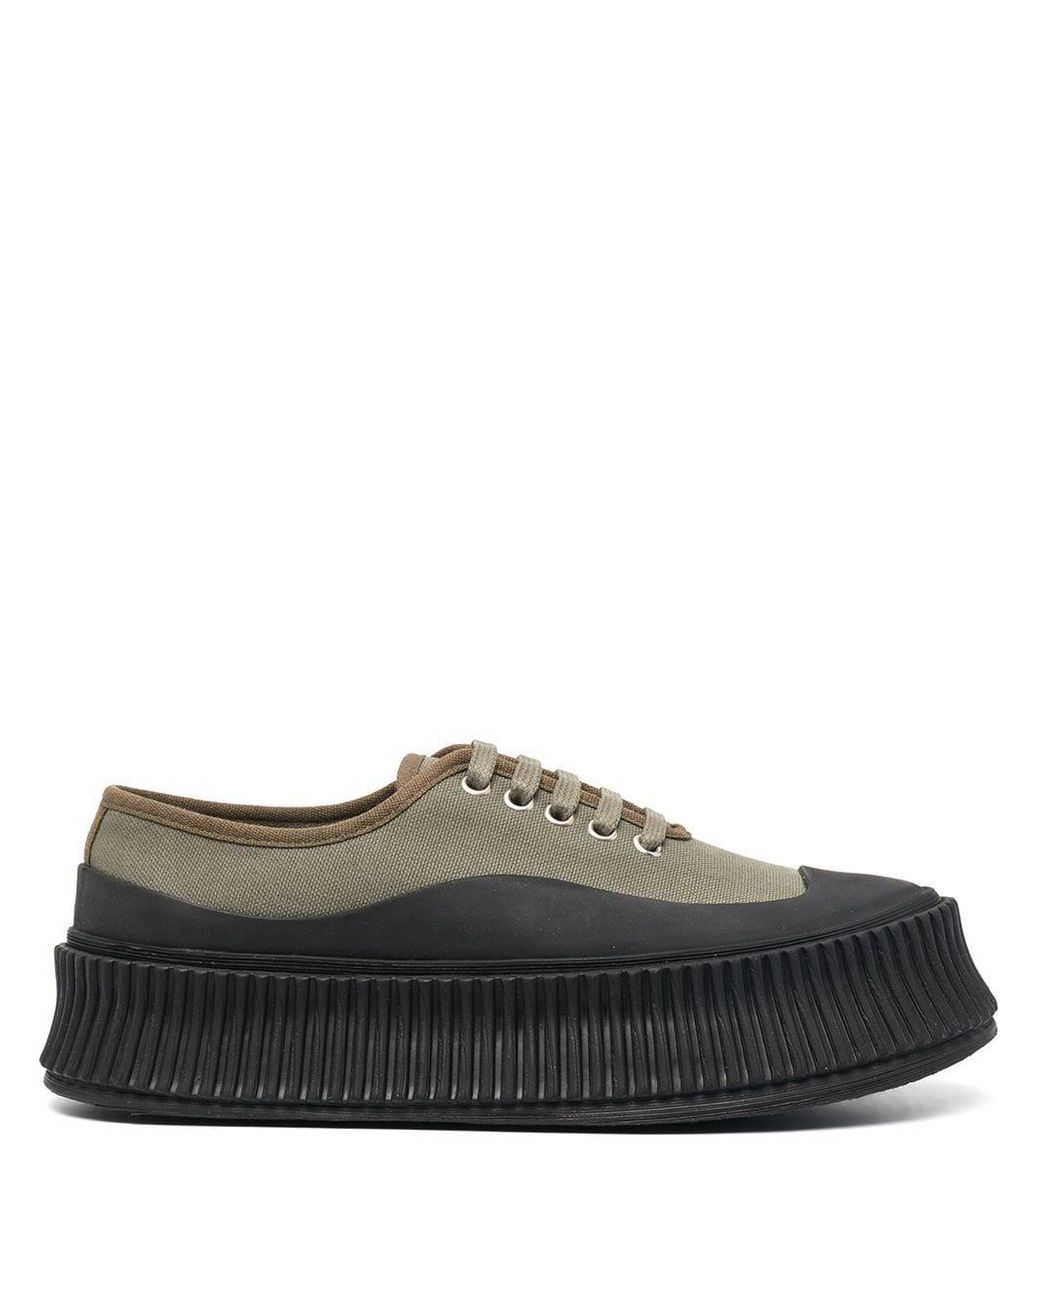 Jil Sander Rubber Two-tone Low-top Sneakers in Green - Save 15% - Lyst